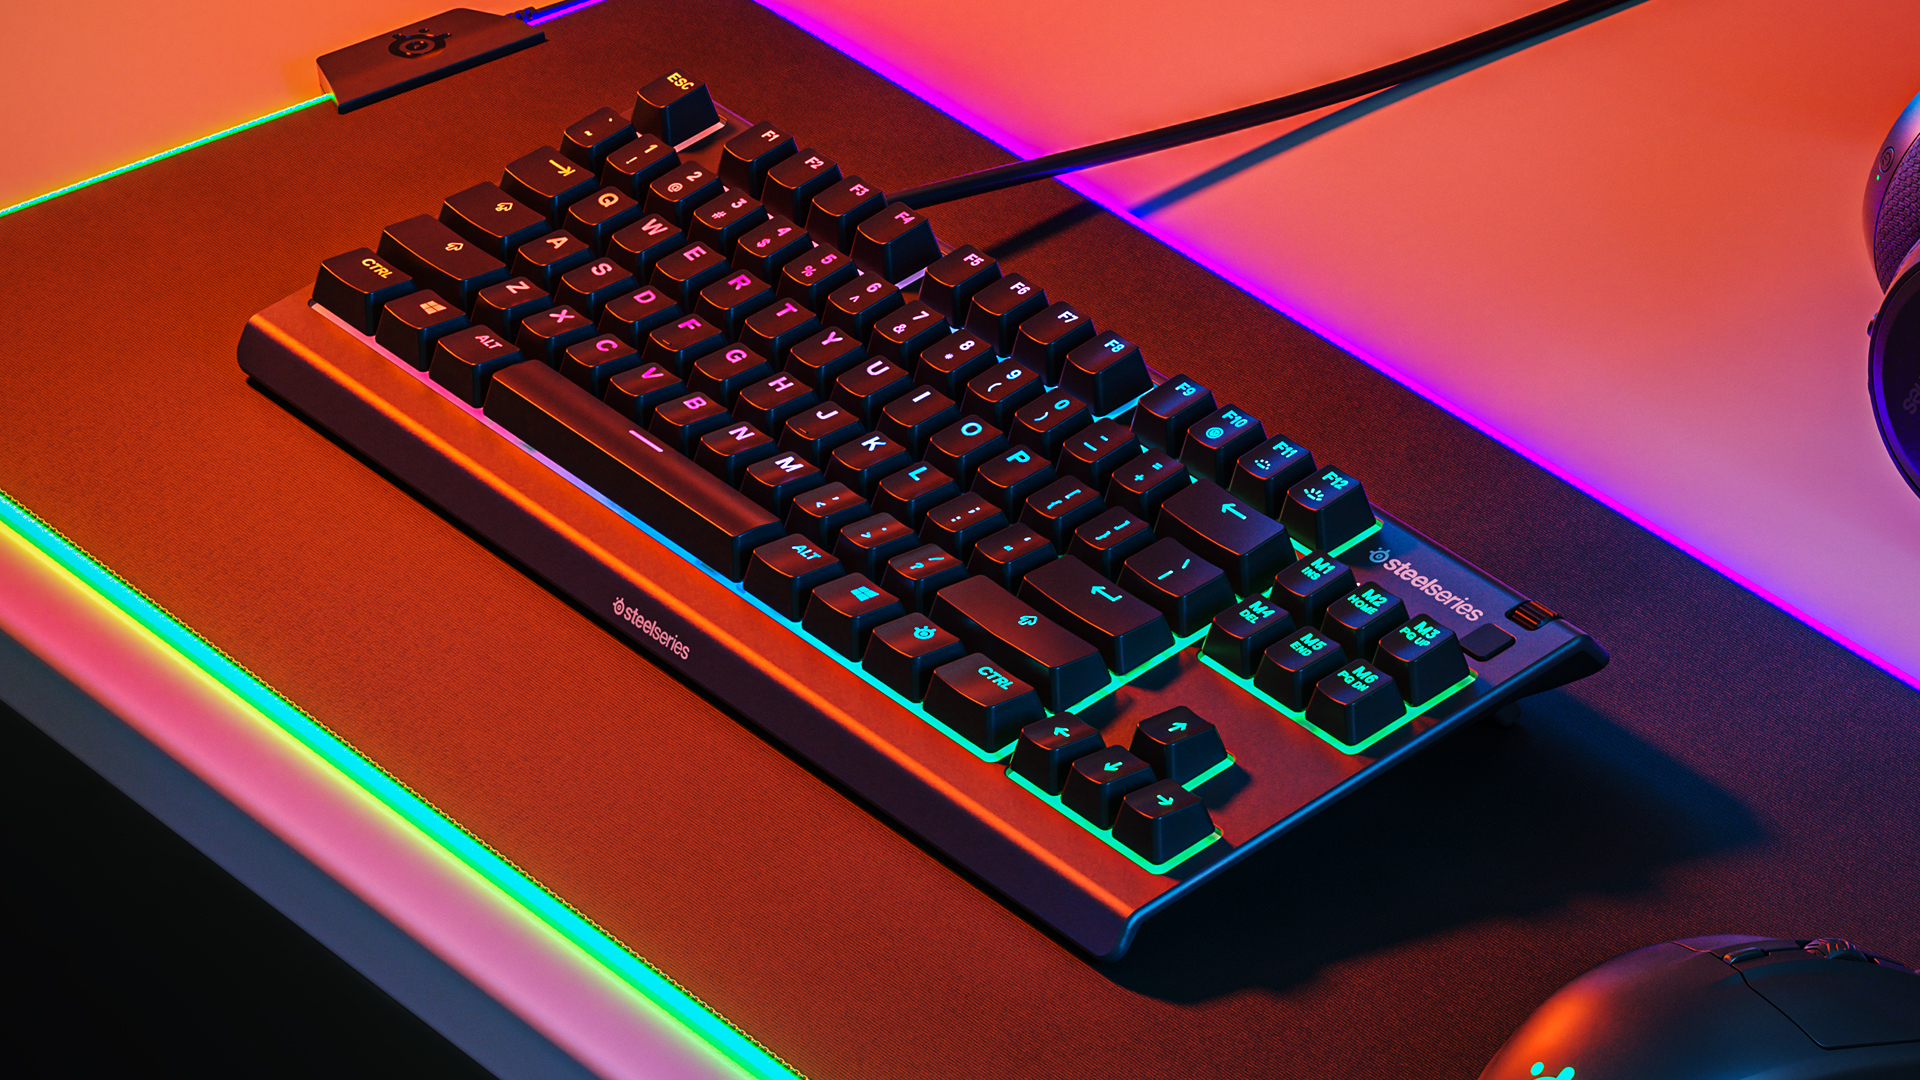 Steelseries New 45 Tkl Keyboard Survives Spills And Dust Ars Technica